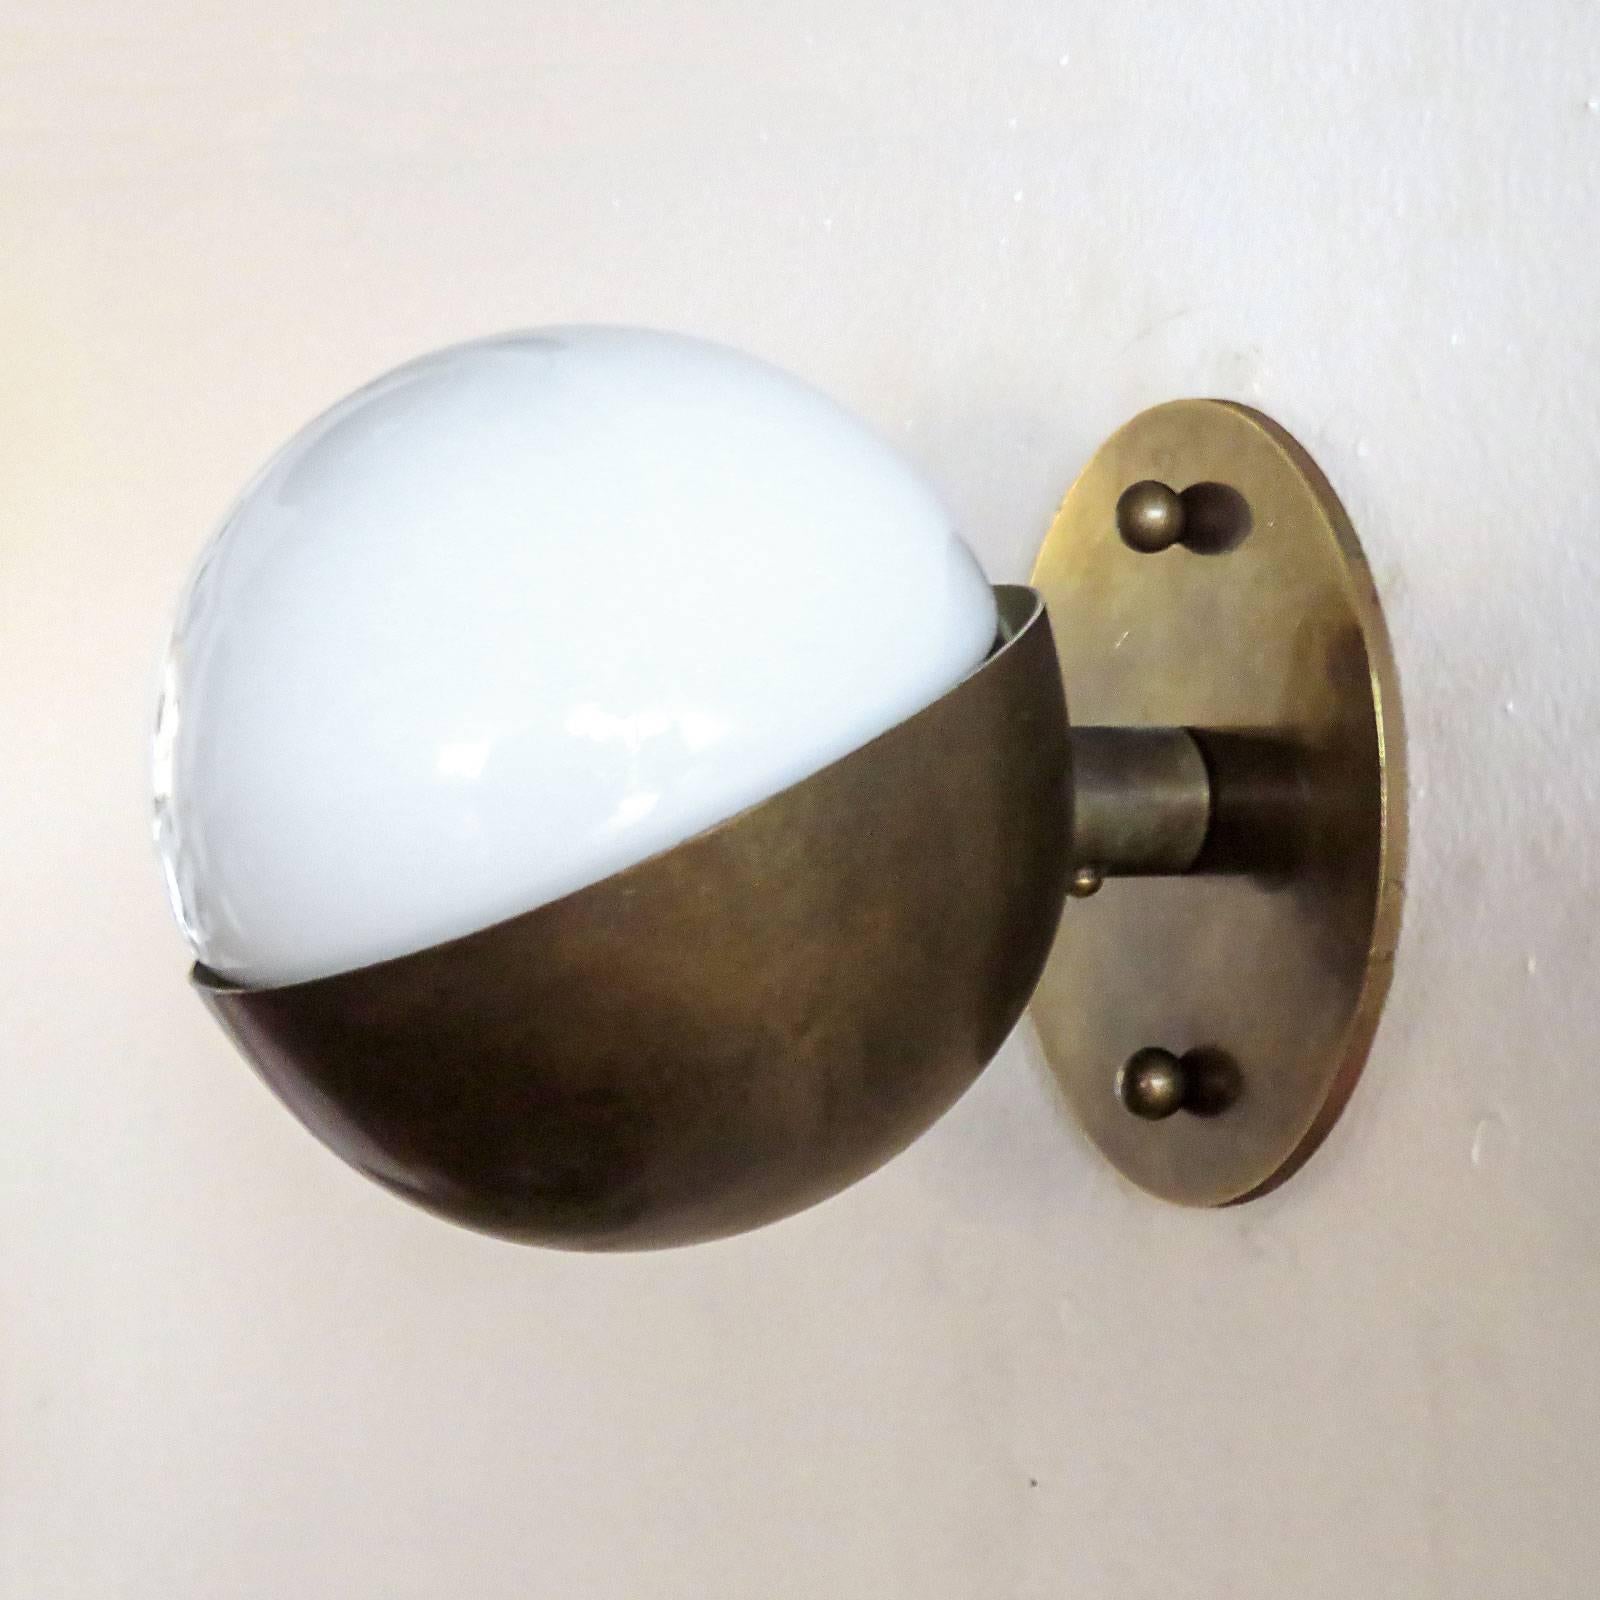 Remarkable small 'Radiohuset' wall light, by Vilhelm Lauritzen for Louis Poulsen, in patinaed brass and opaline glass designed in 1931 for the Broadcasting House in Copenhagen.
  